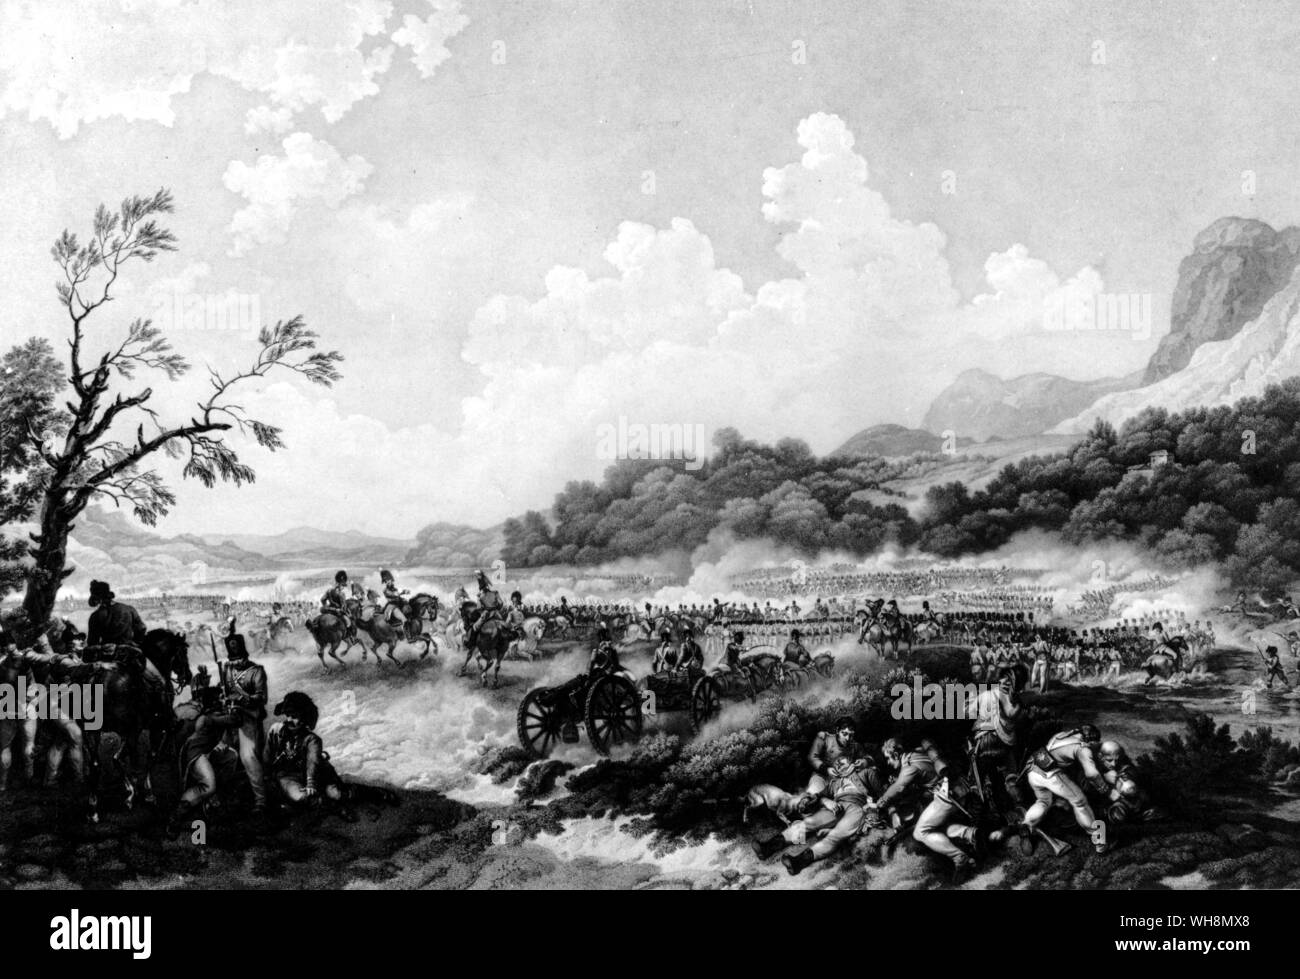 ... one of the most significant military events of the era': the Battle of |maida in southern Italy, 4 July 1806, when an outnumbered English force under Sir John Stuart defeated an attack by General Reynier's division. Engraved by A. Cardon after P. J. de Loutherbourg. National Army Museum, London Stock Photo